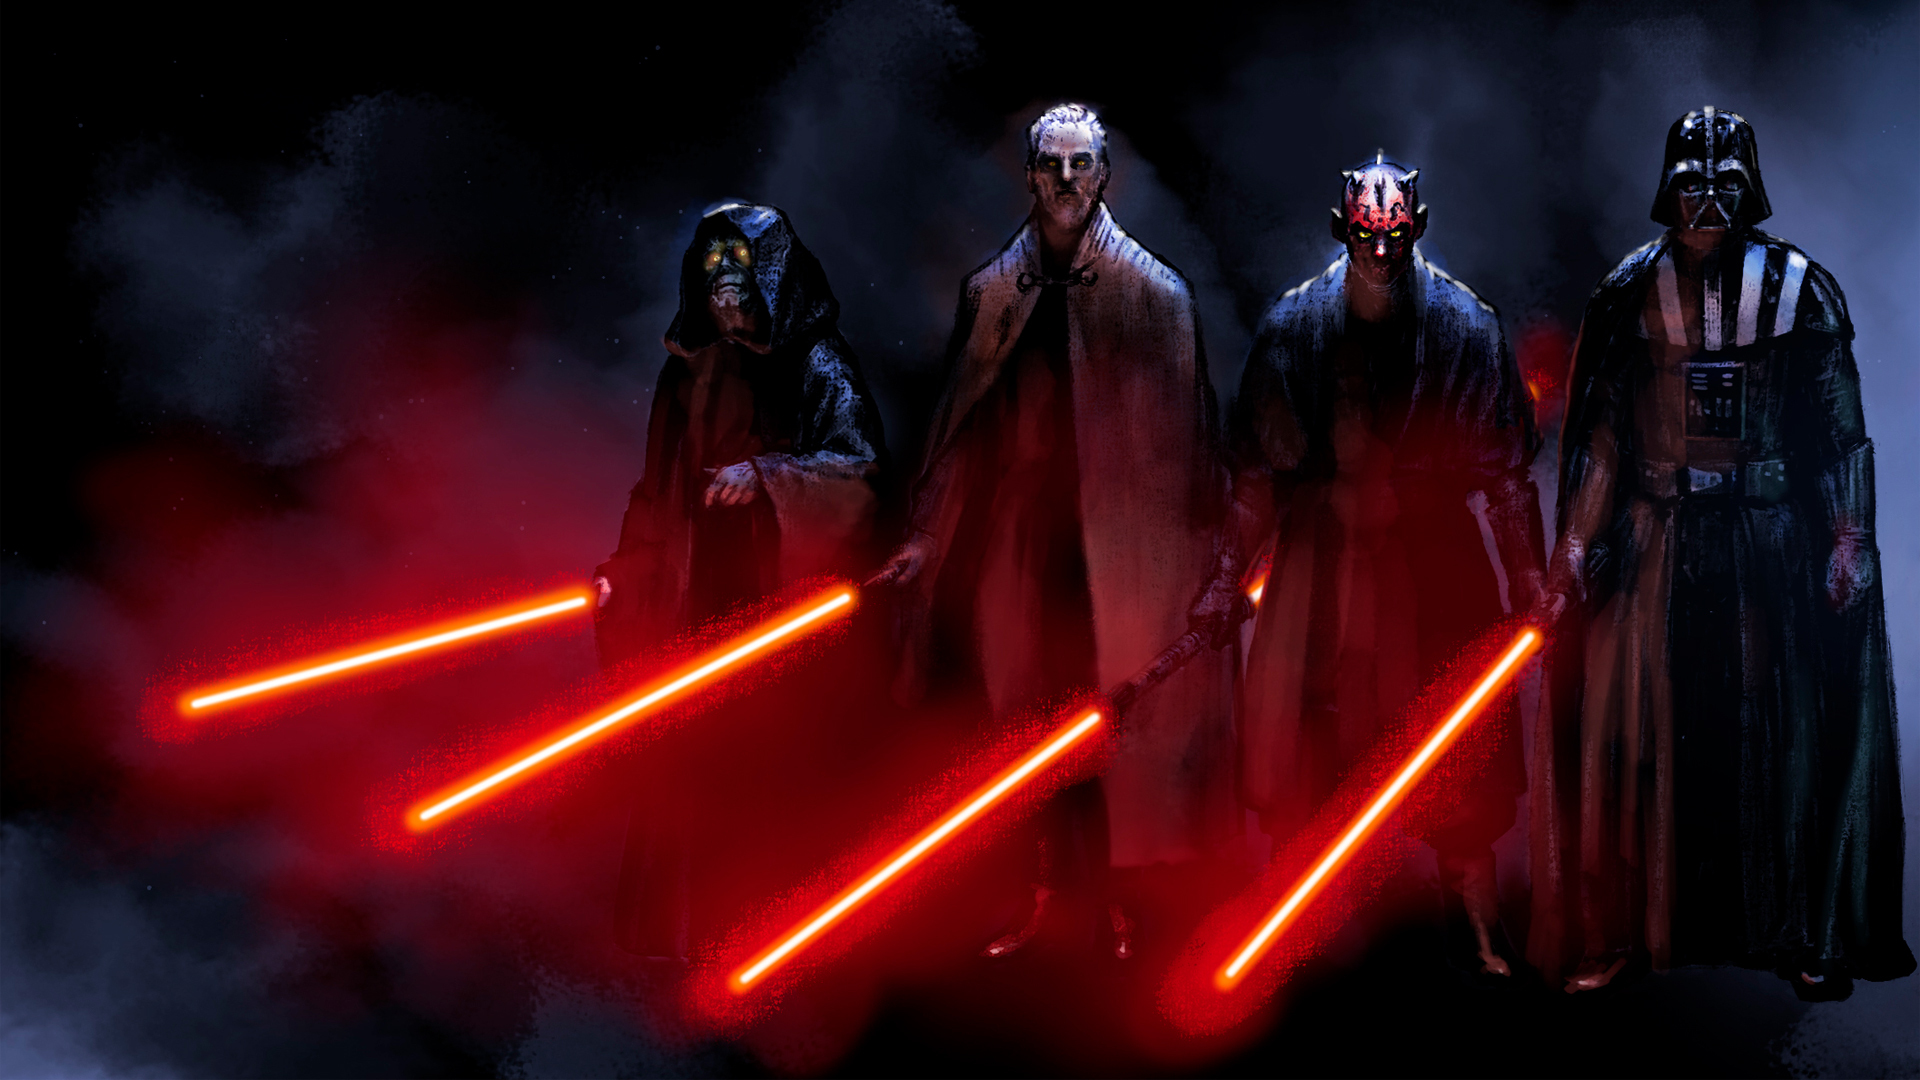 movie, star wars, cape, coat, darth maul, darth sidious, darth vader, glowing eyes, helmet, hood, horns, lightsaber, mask, red lightsaber, sith (star wars), yellow eyes wallpapers for tablet